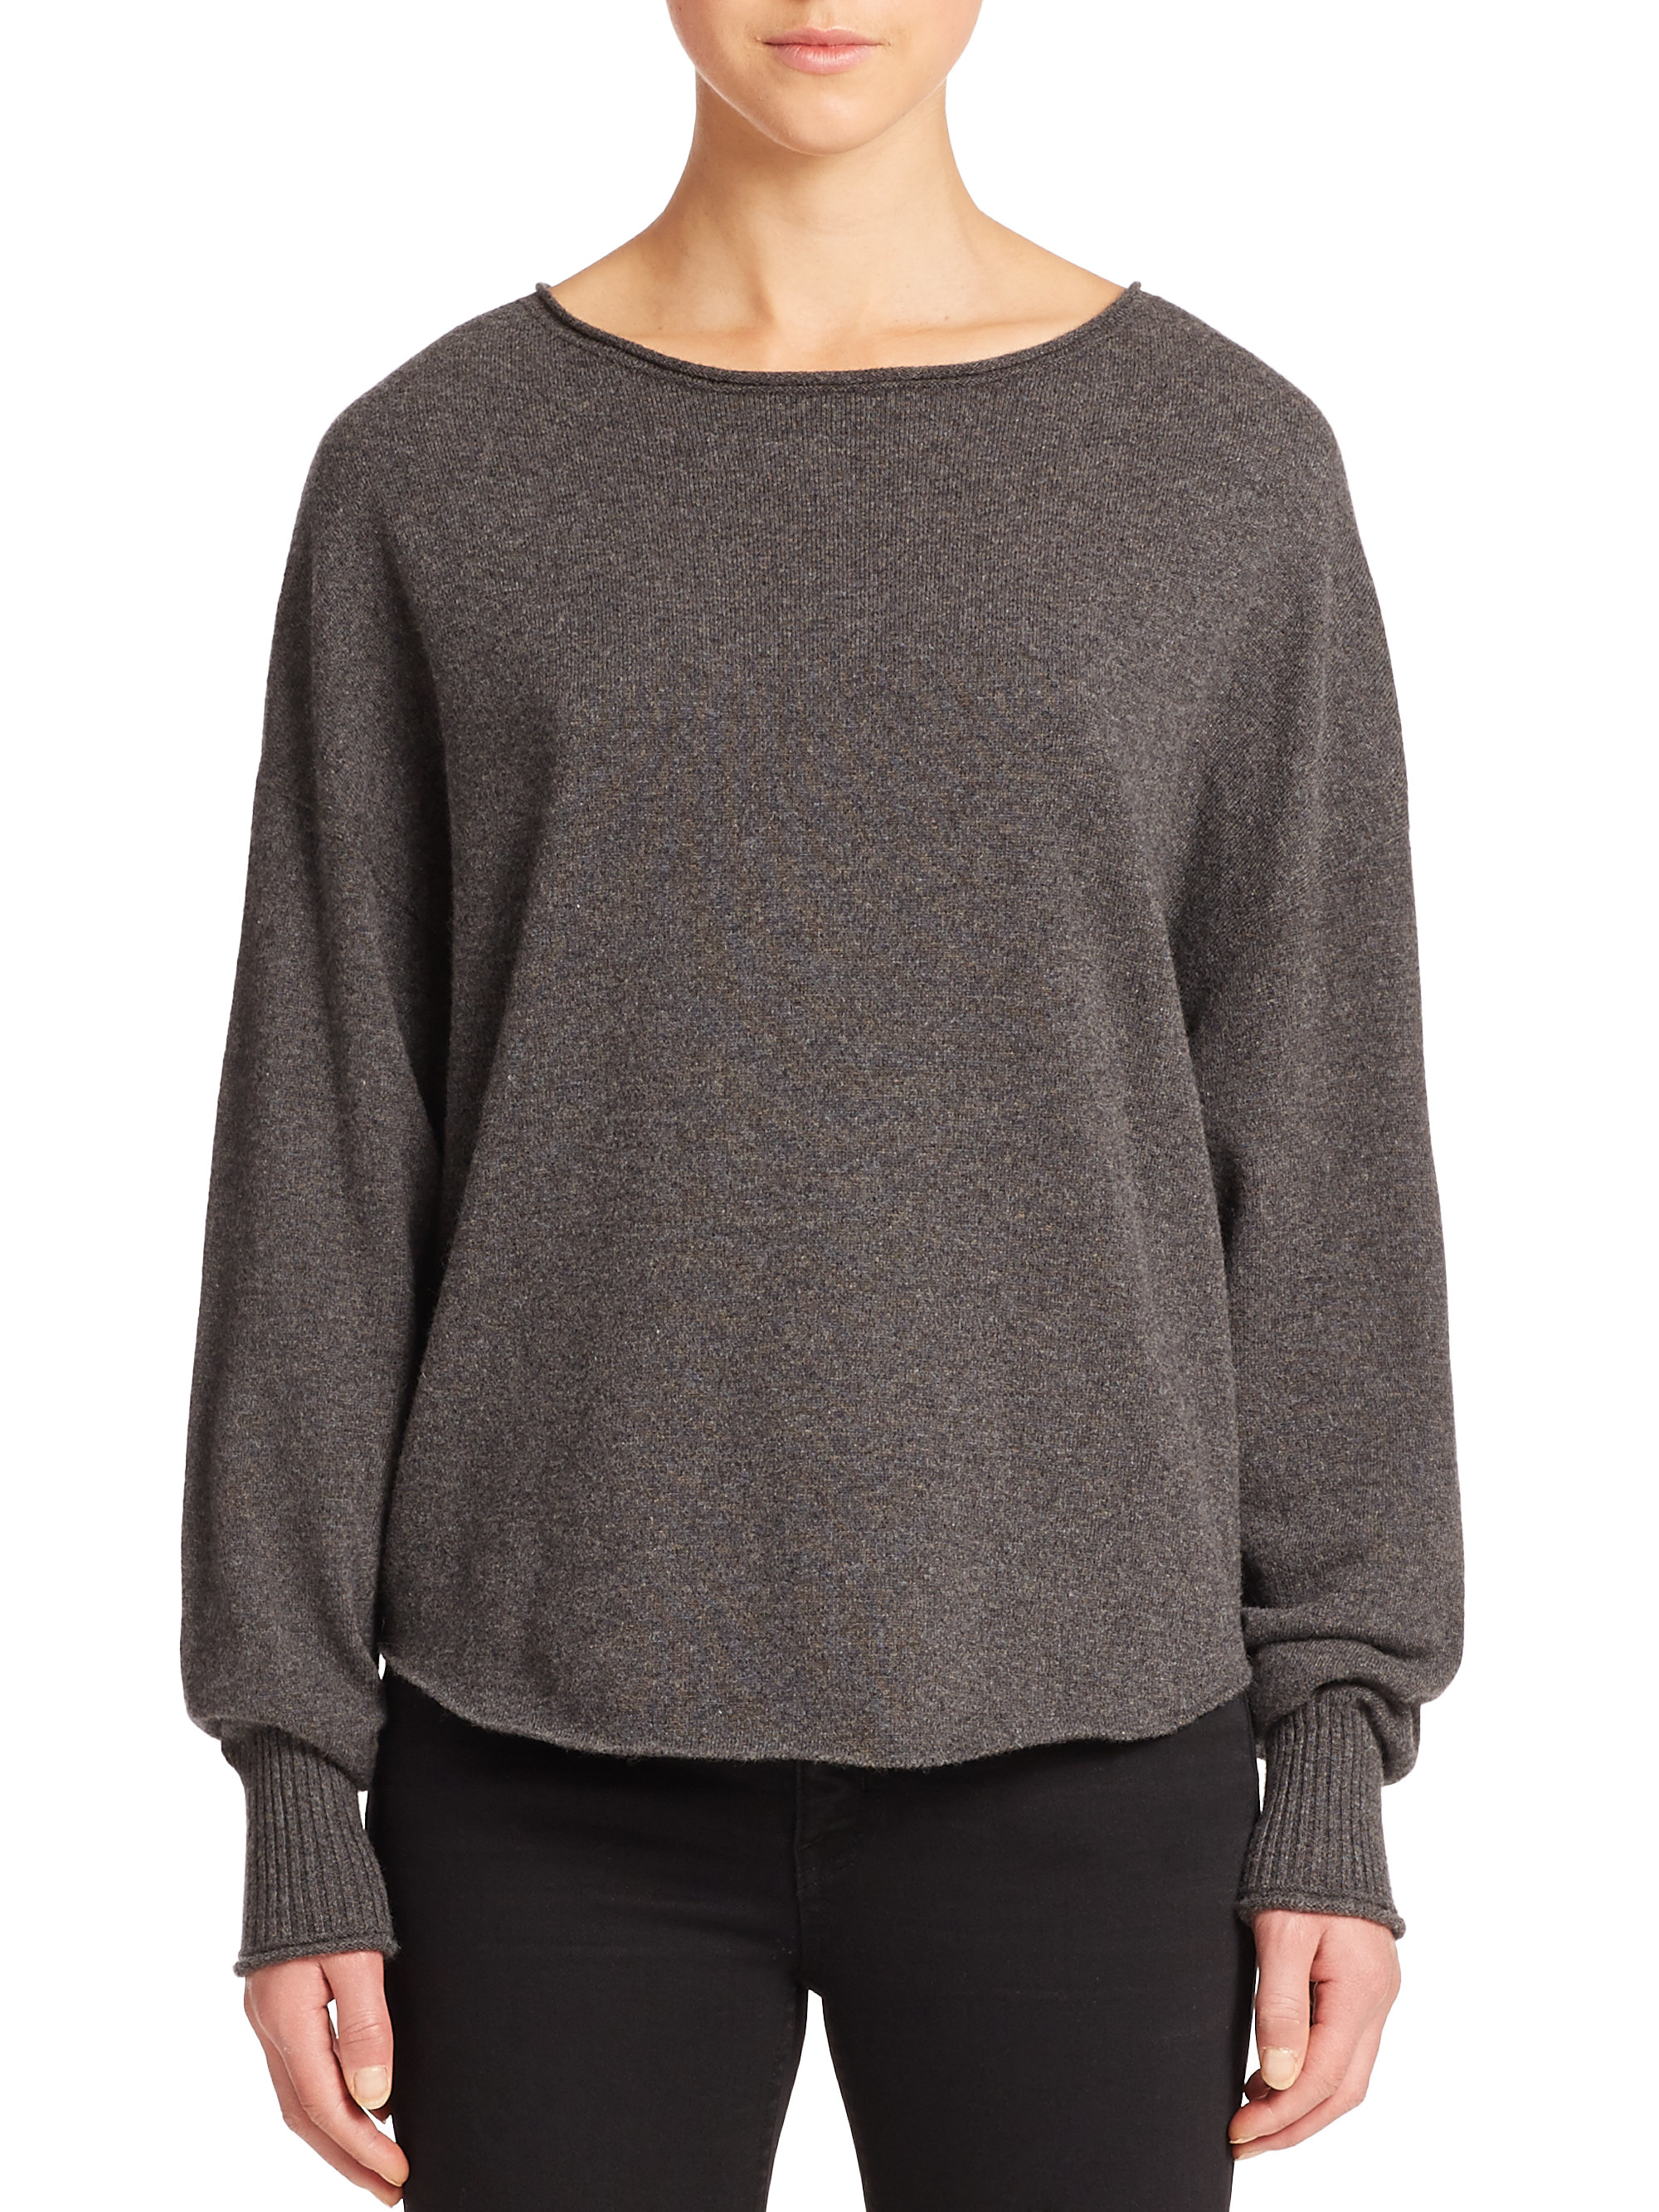 Lyst - Helmut Lang Oversized Cashmere Sweater in Gray